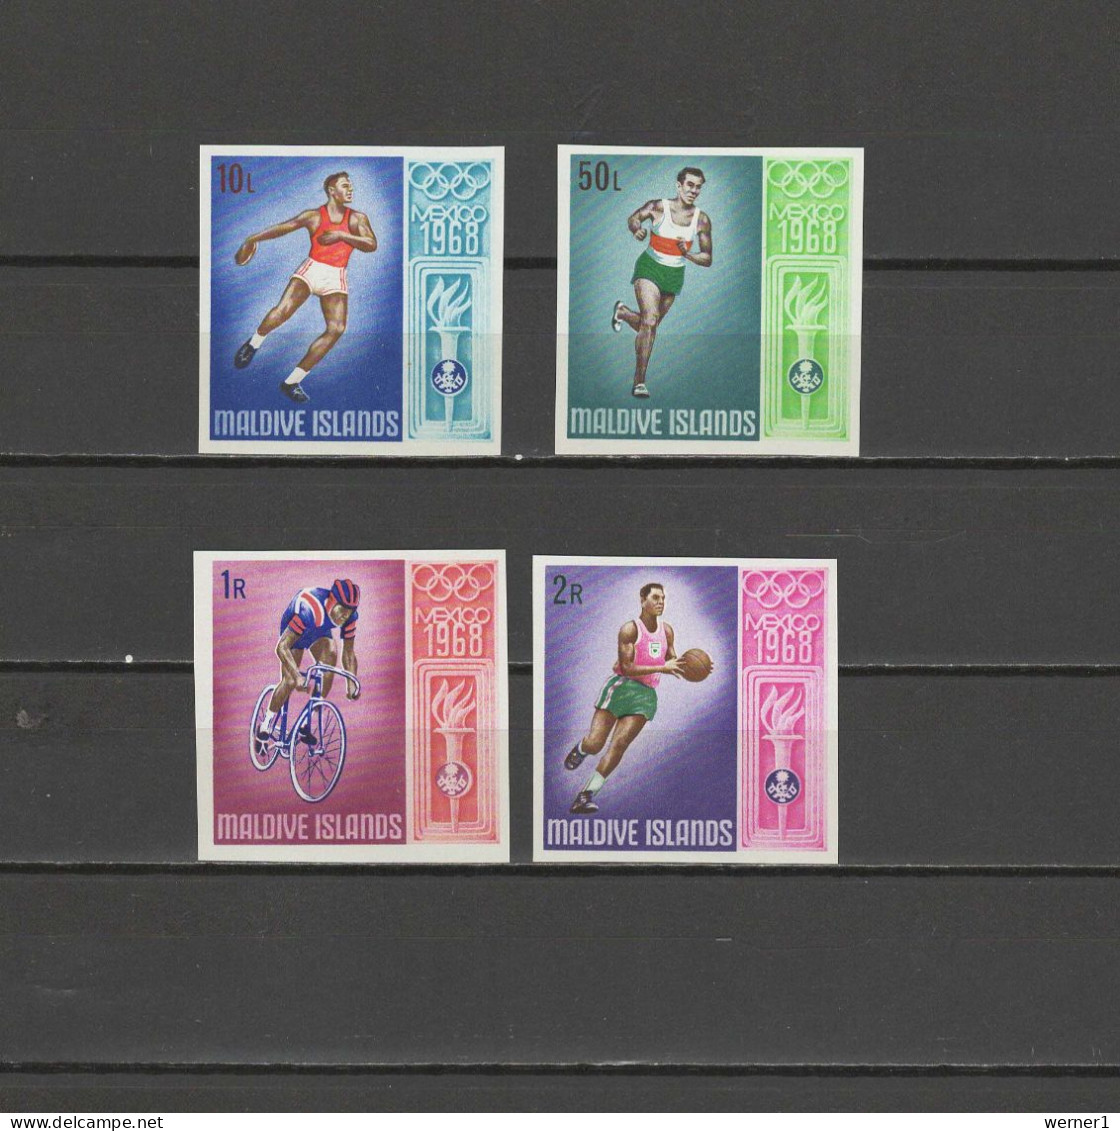 Maldives 1968 Olympic Games Mexico, Athletics, Cycling, Basketball Set Of 4 Imperf. MNH -scarce- - Summer 1968: Mexico City